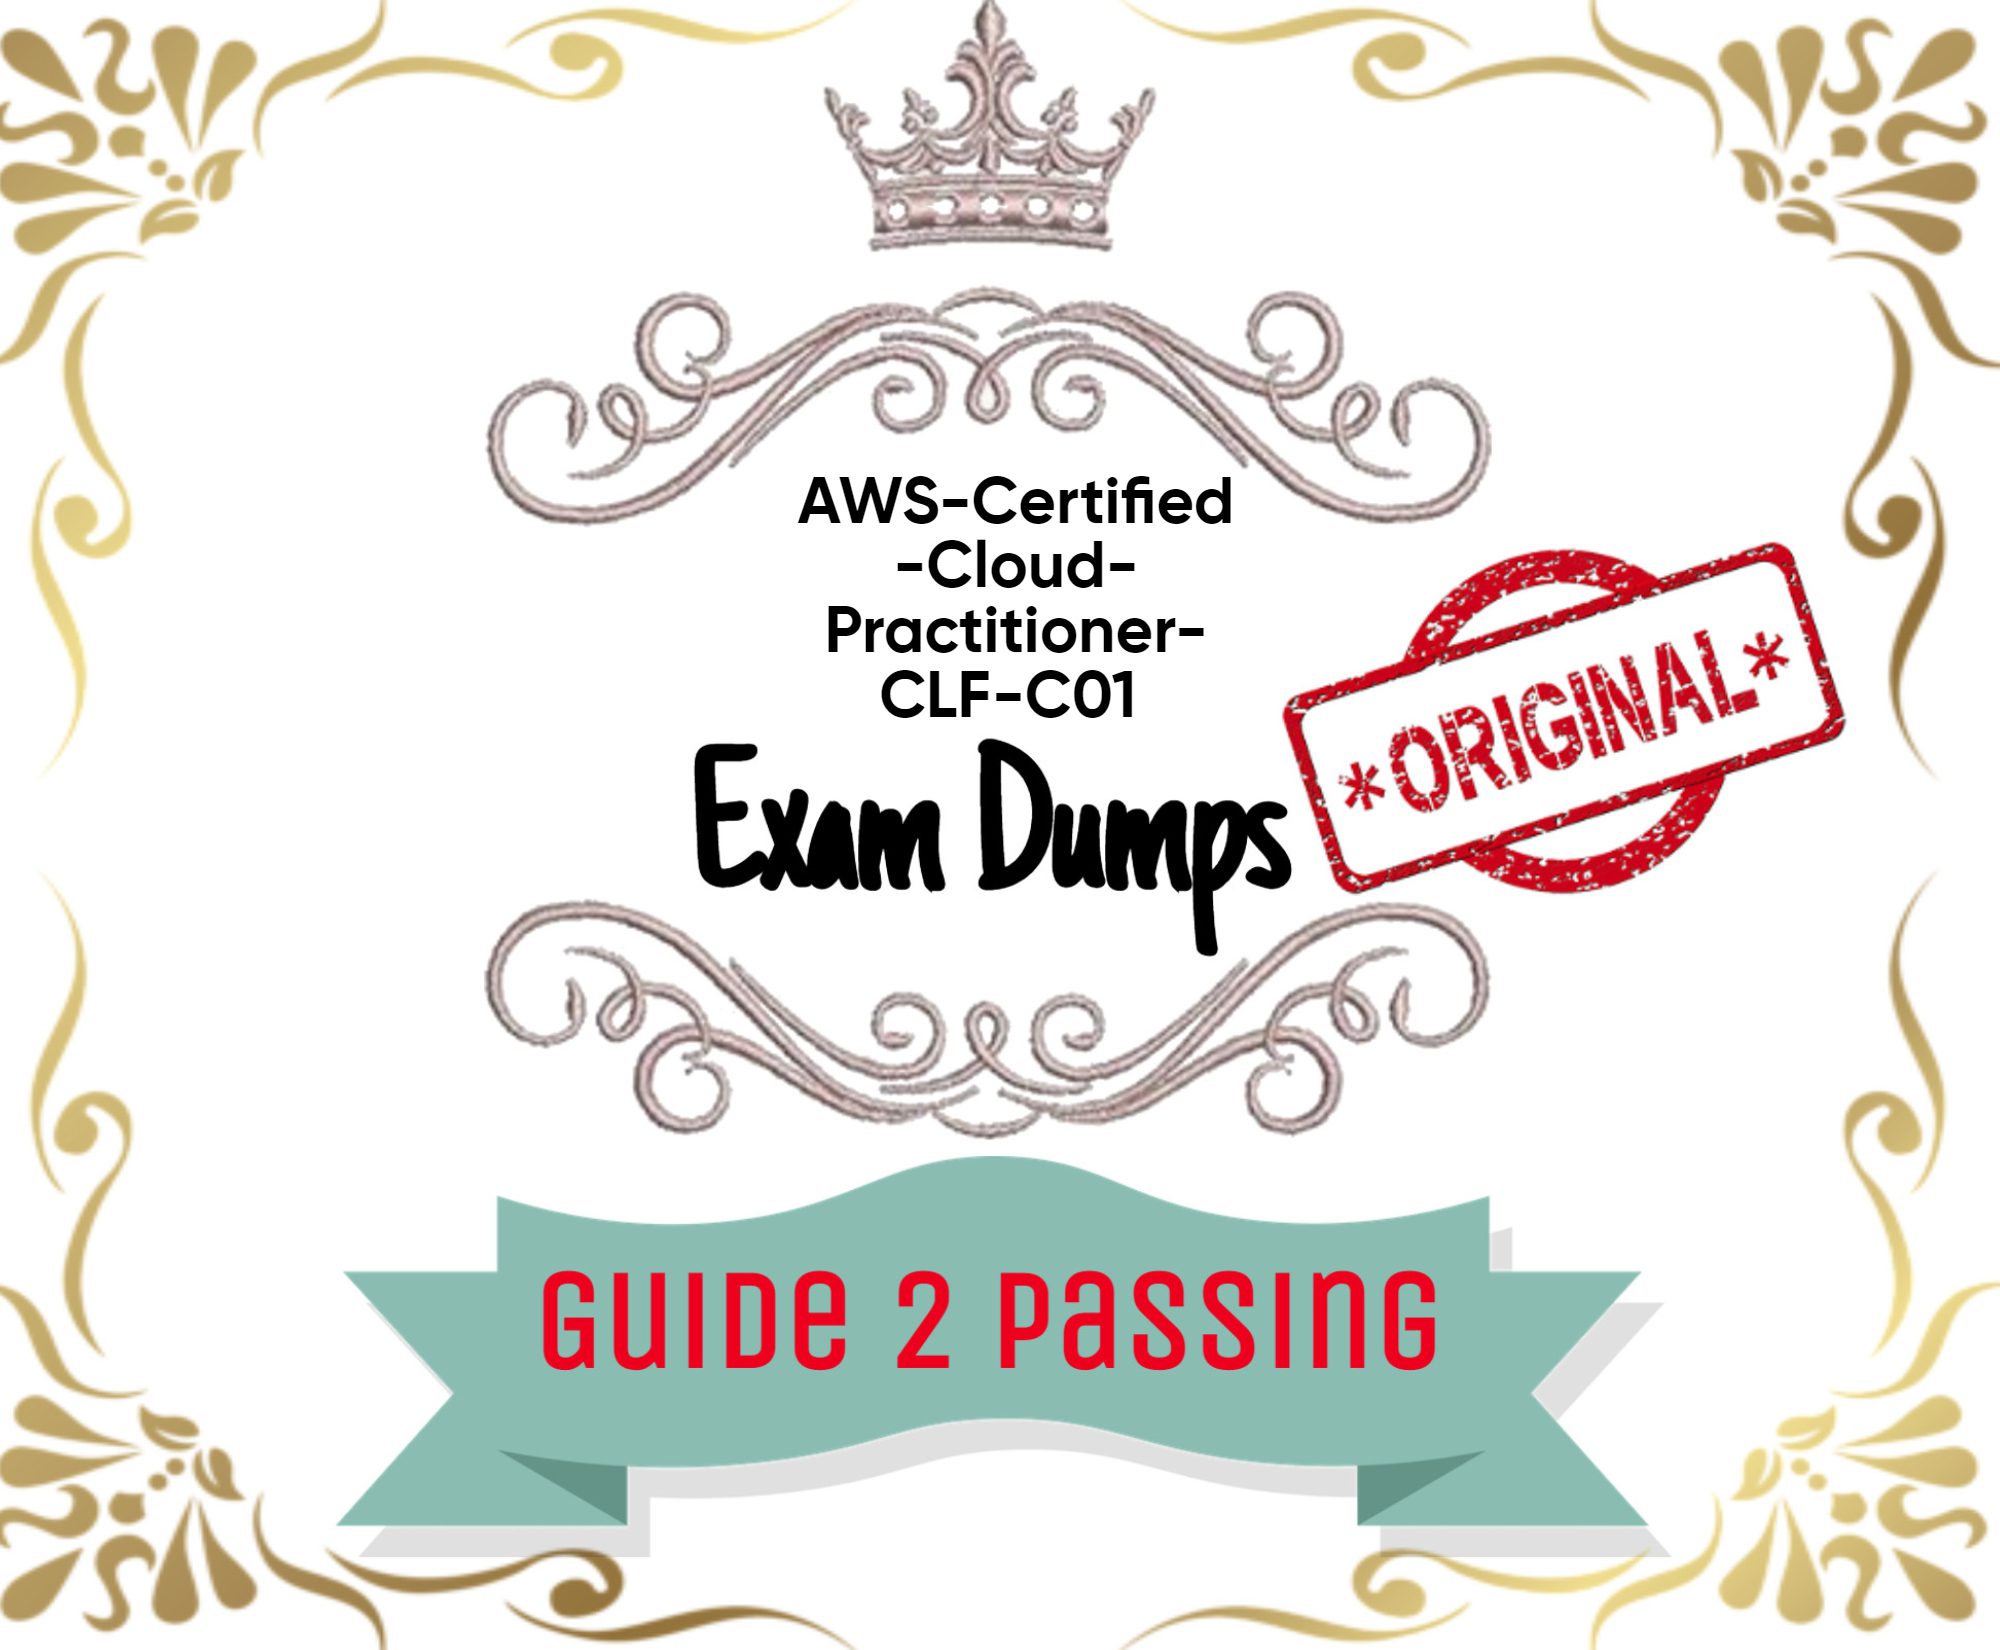 Pass Your Amazon AWS AWS-Certified-Cloud-Practitioner-CLF-C01 Exam Dumps From Guide 2 Passing